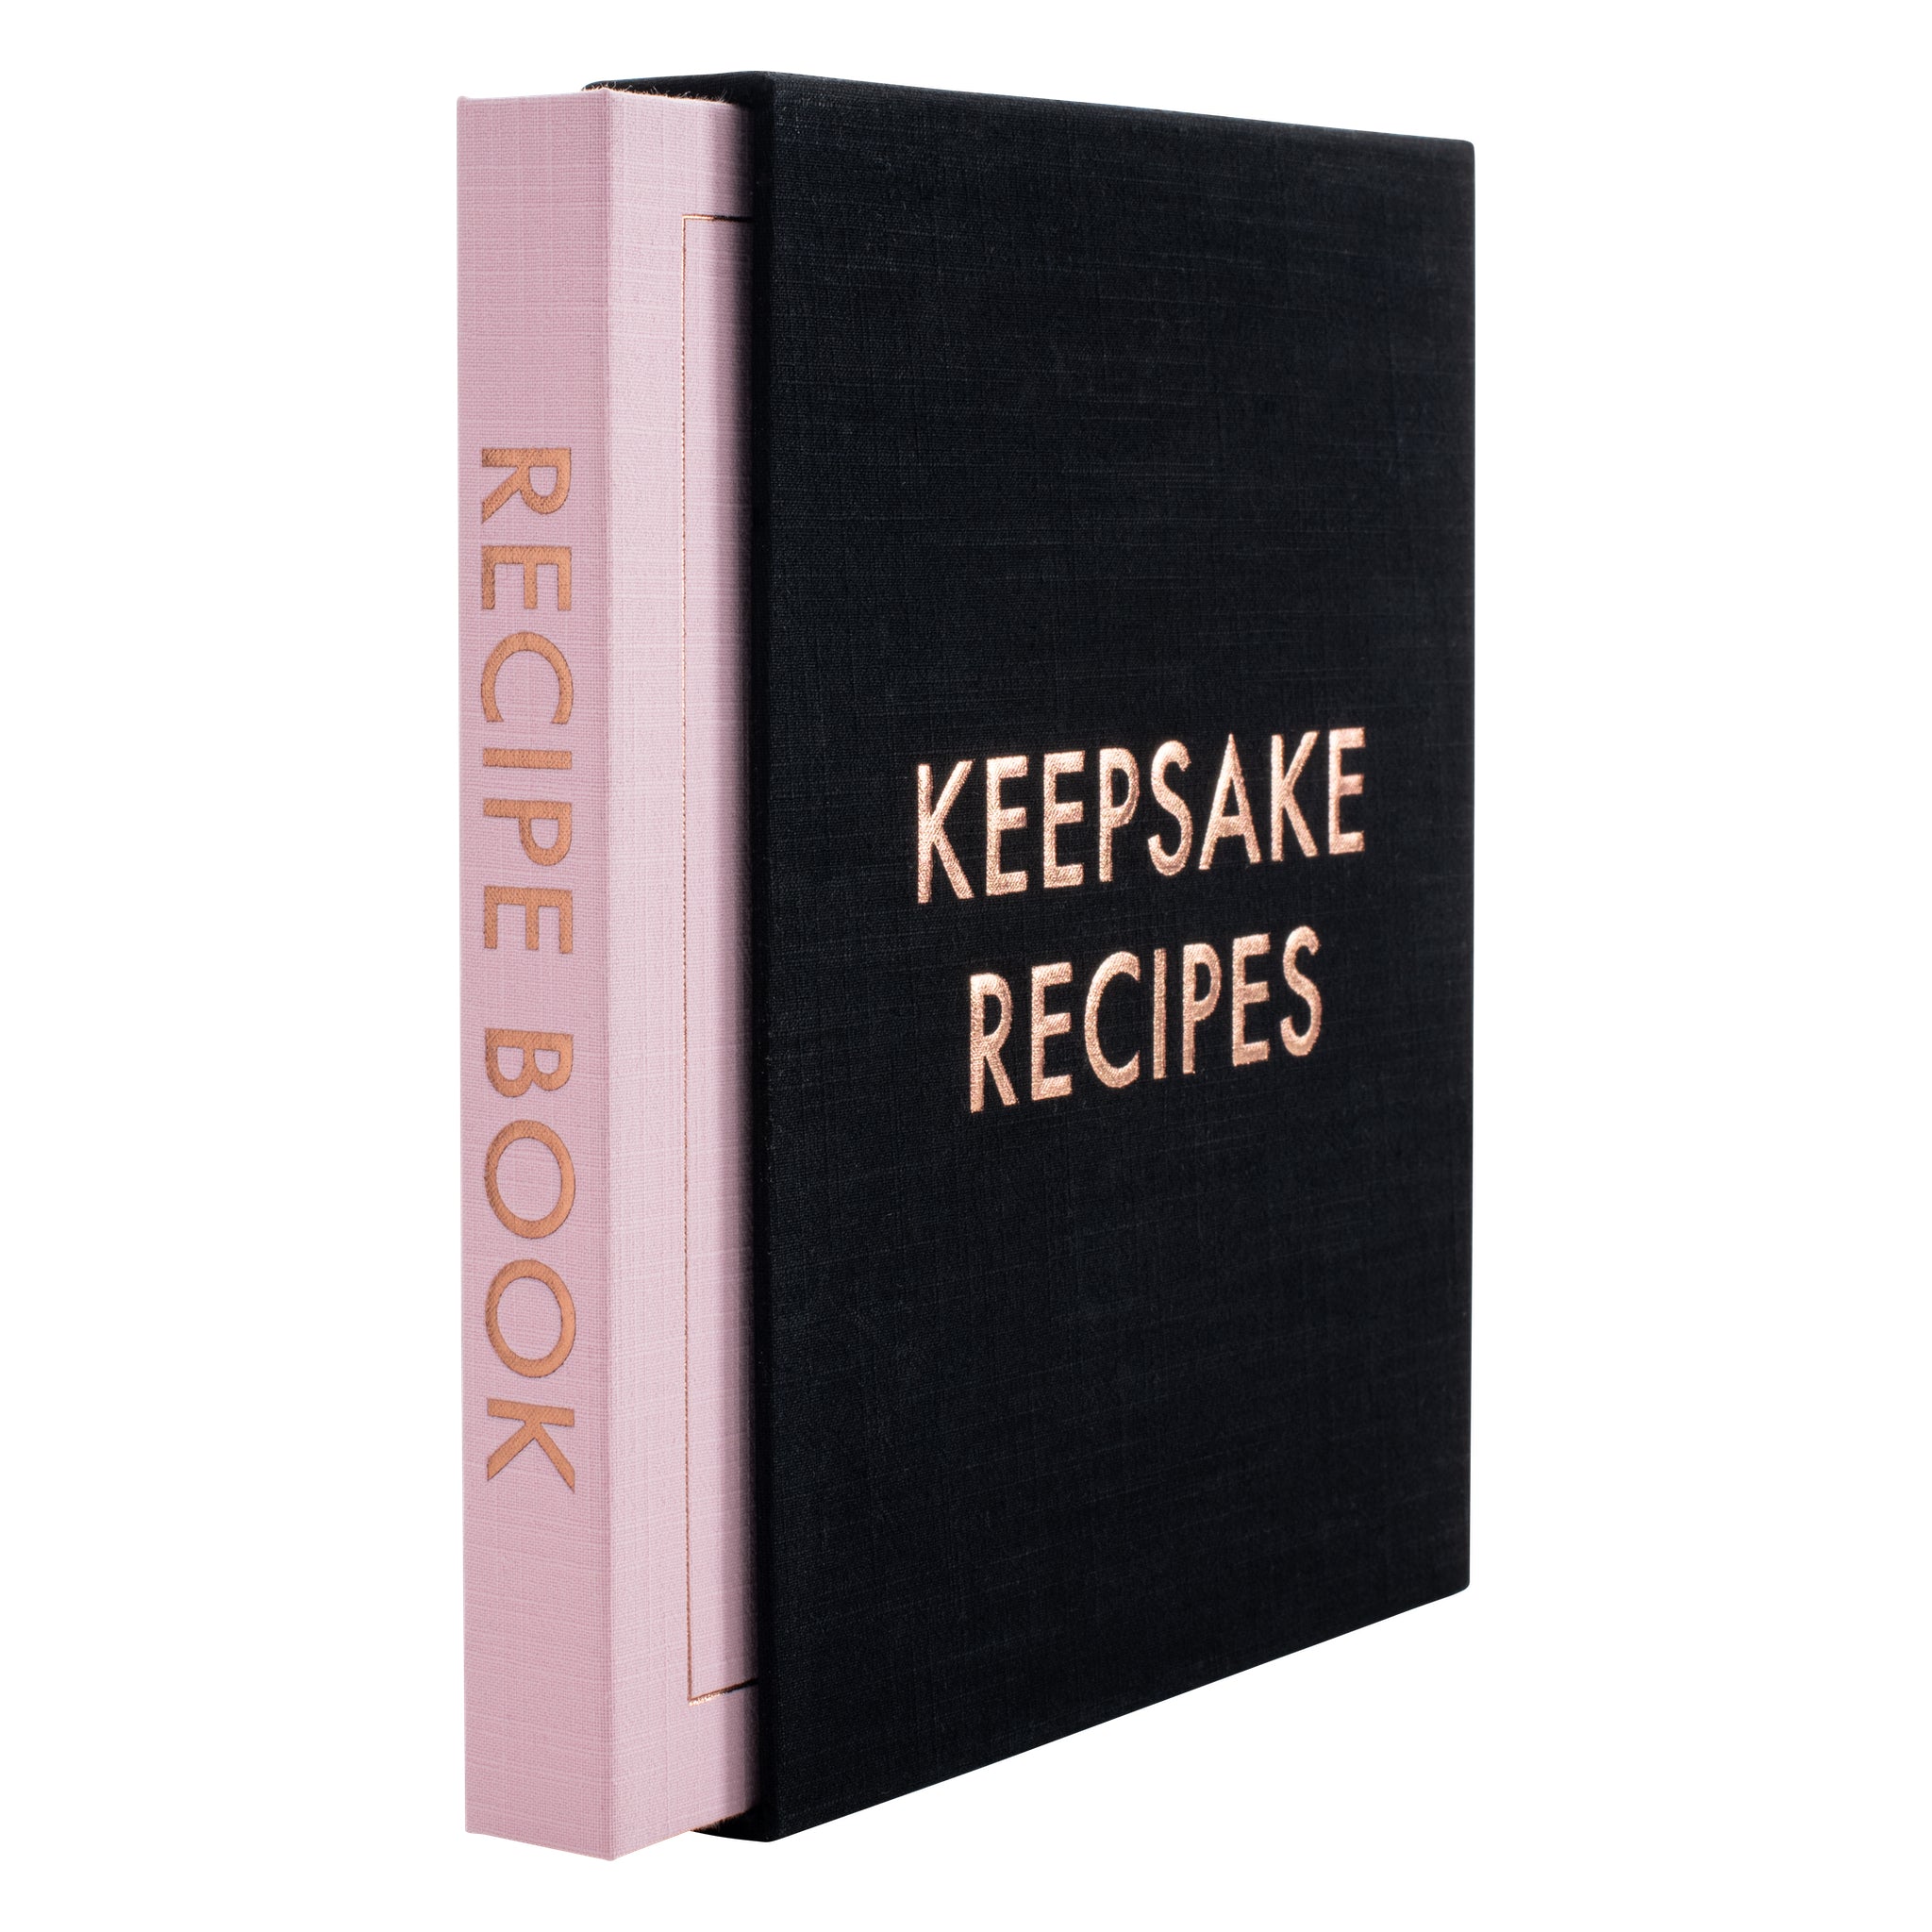  My Family Recipes  A Keepsake Cookbook: A Custom Blank Recipe  Book to Collect & Organize All Your Family's Favorite Recipes: Designs,  Jooly: Books